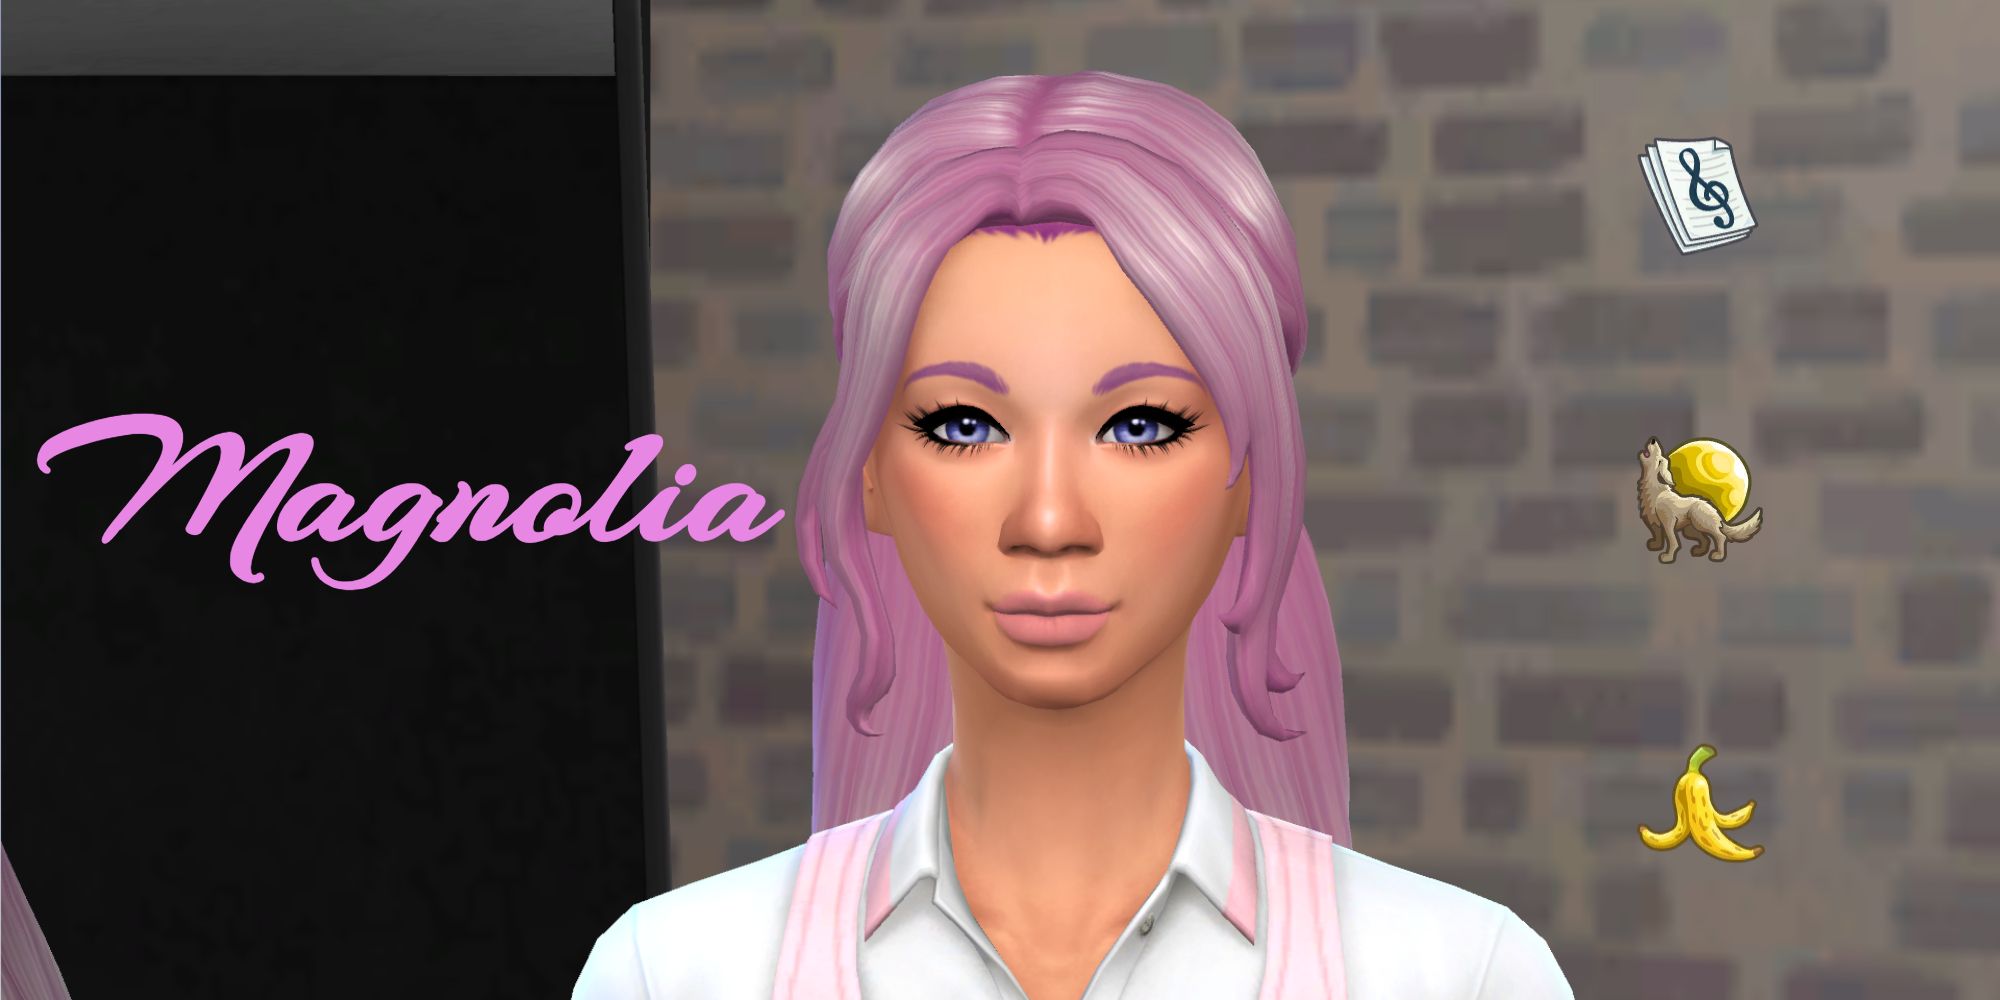 A pink-haired Sim from the magnolia generation